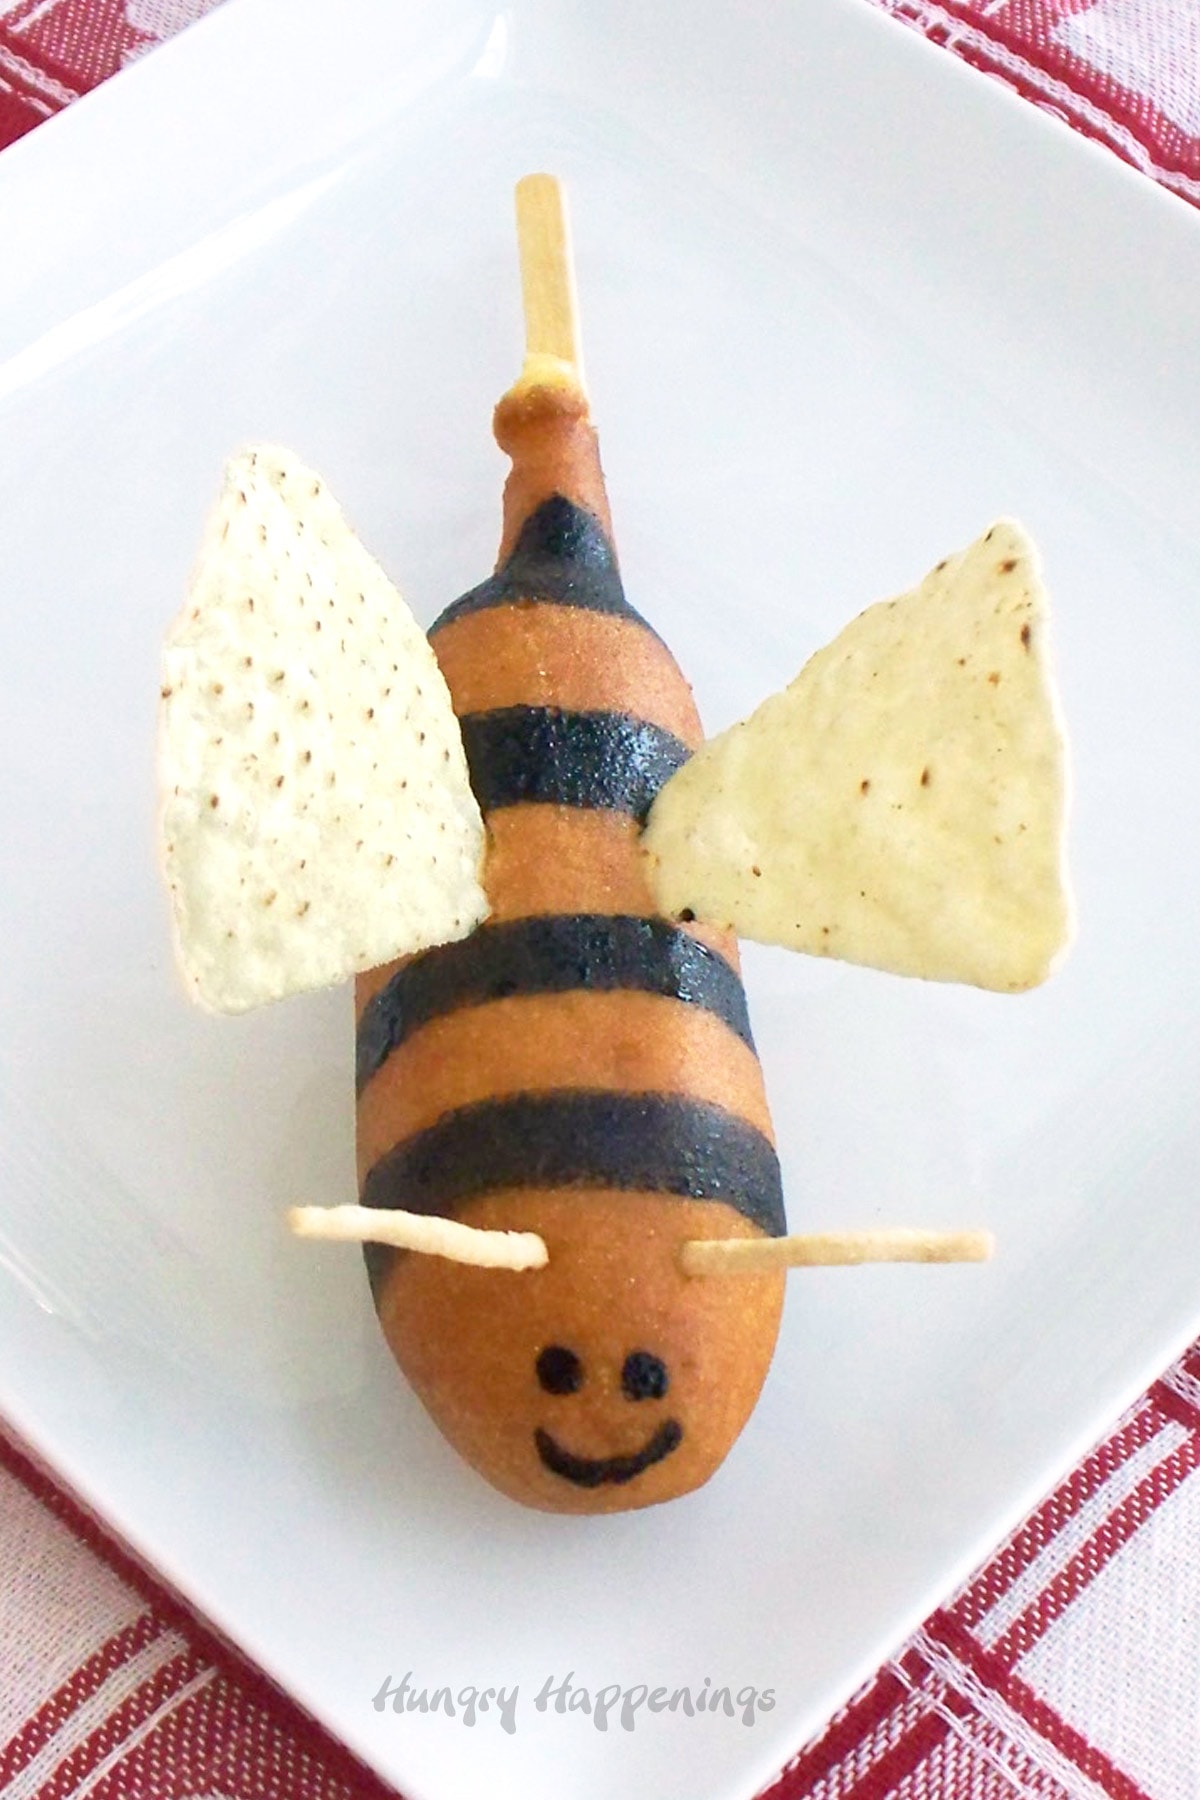 a corn dog decorated to look like a bumble bee.